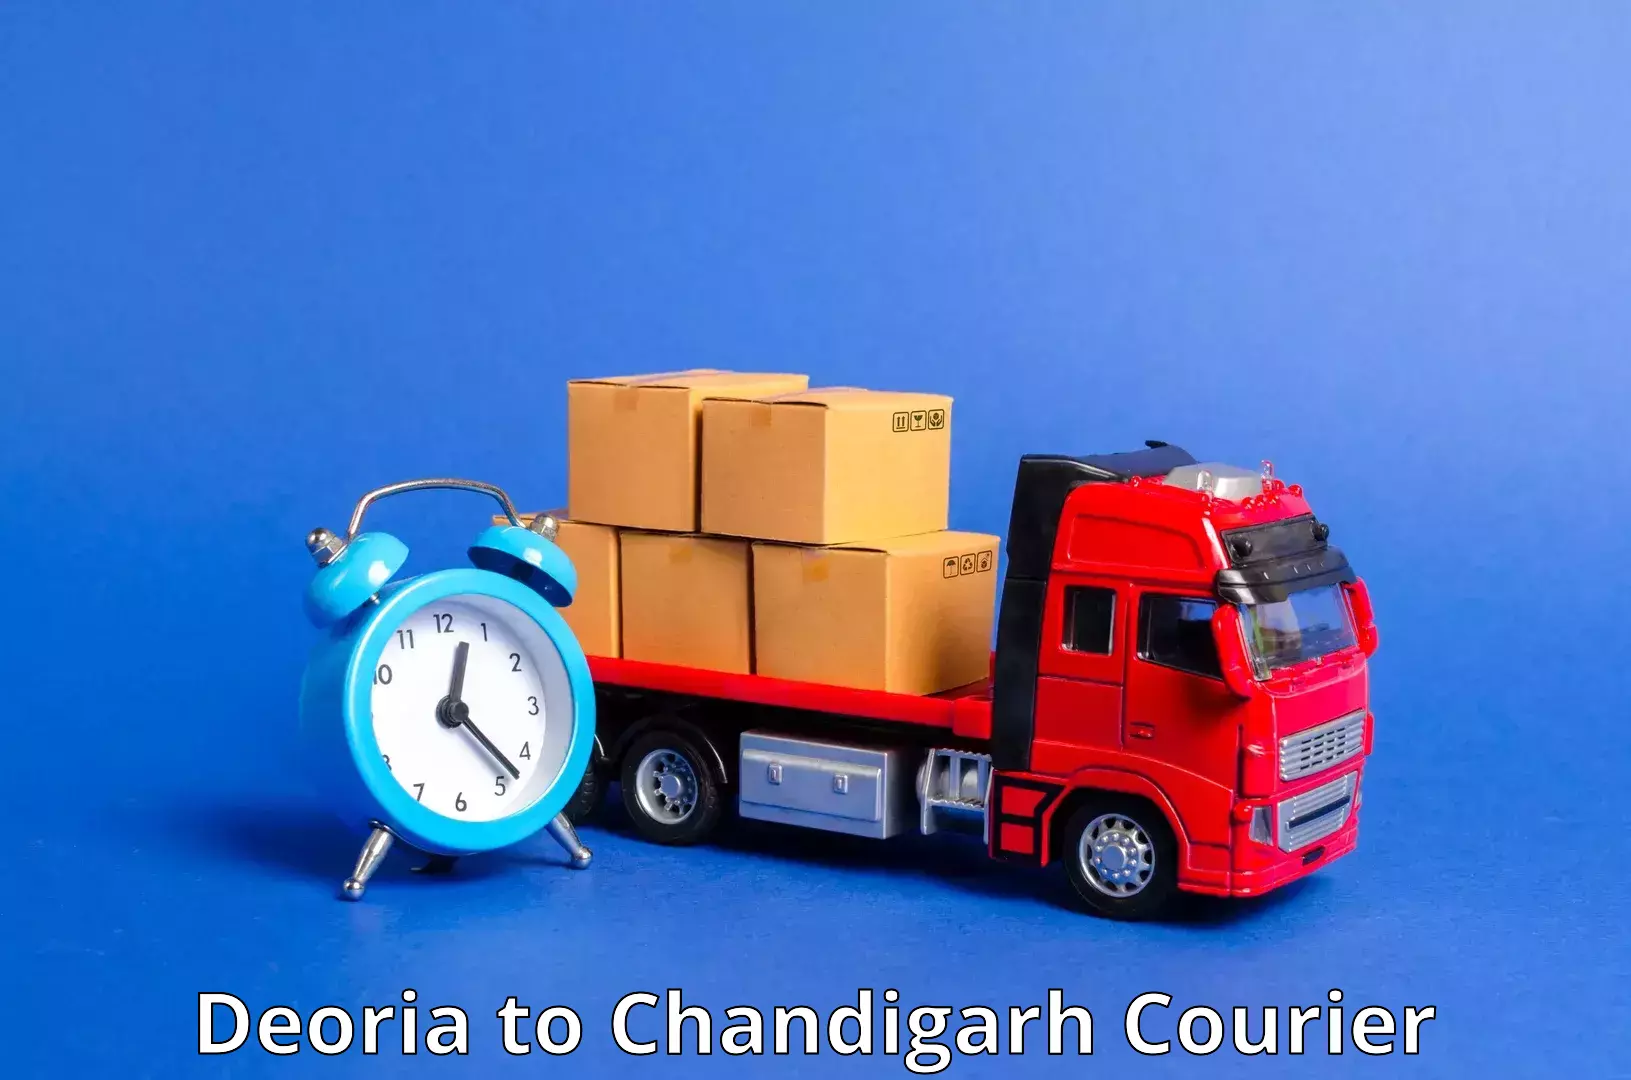 24-hour courier service Deoria to Chandigarh